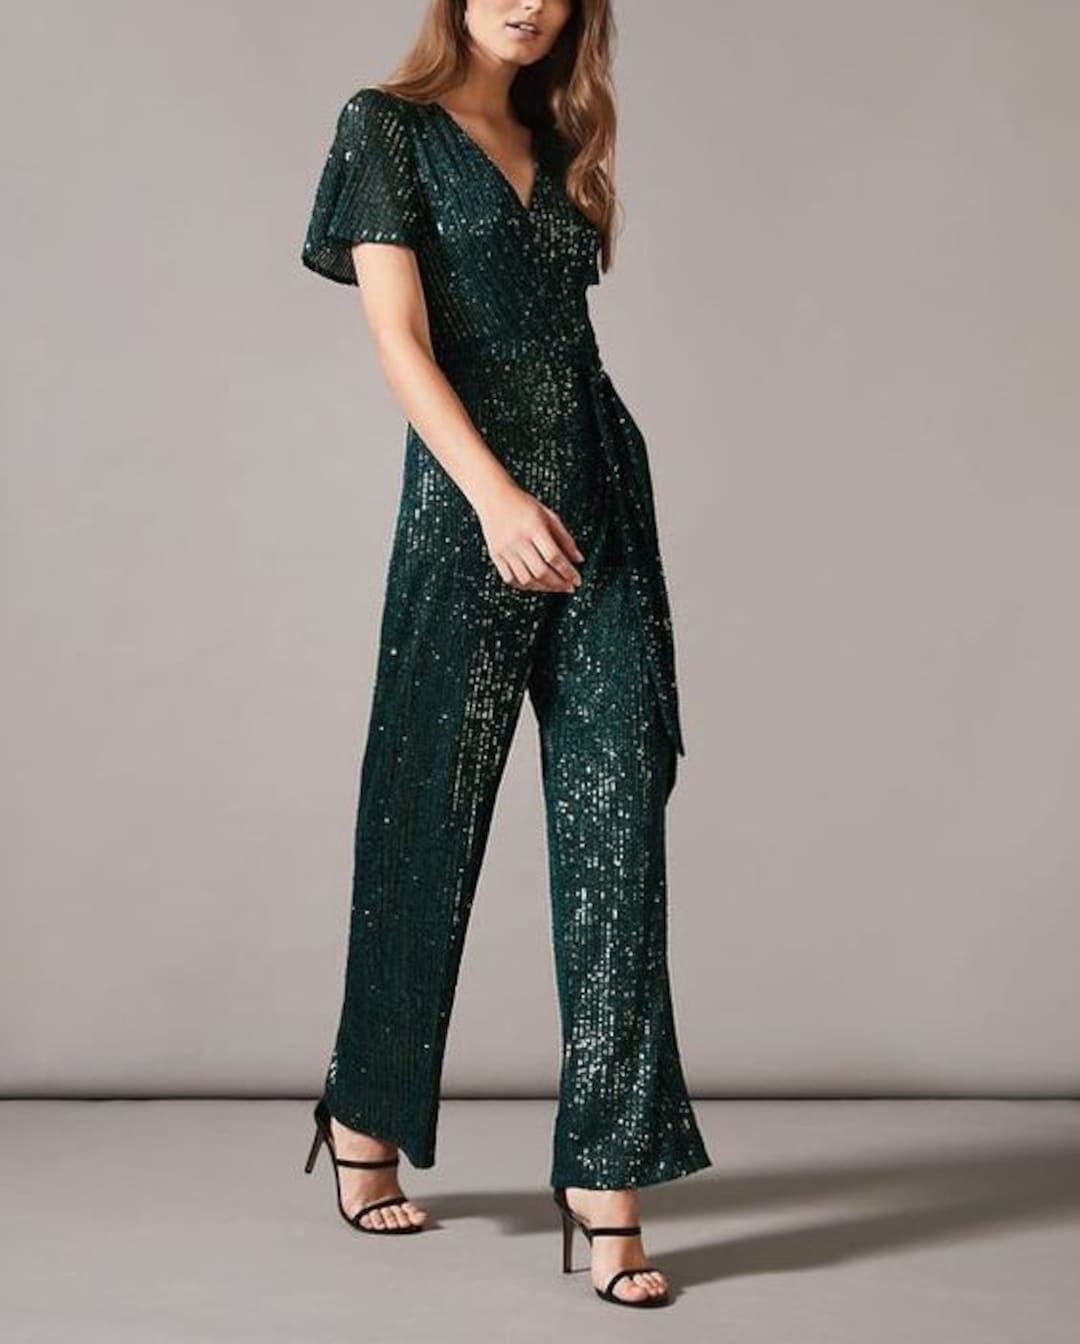 Emerald Green Sequin Jumpsuits for Women Jumpsuit Outfit - Etsy